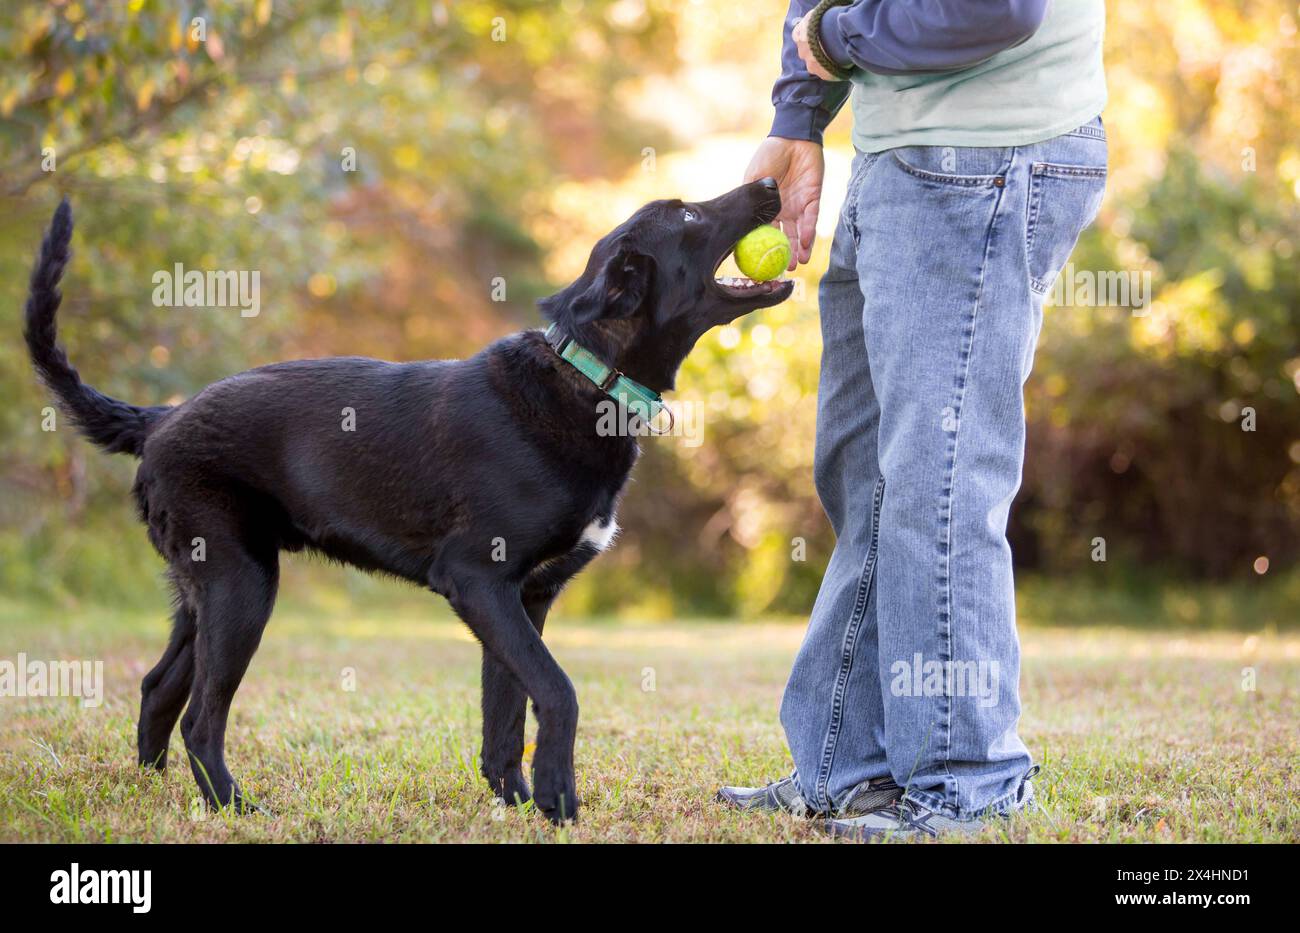 A black Retriever mixed breed dog playing fetch and giving a ball to a person Stock Photo